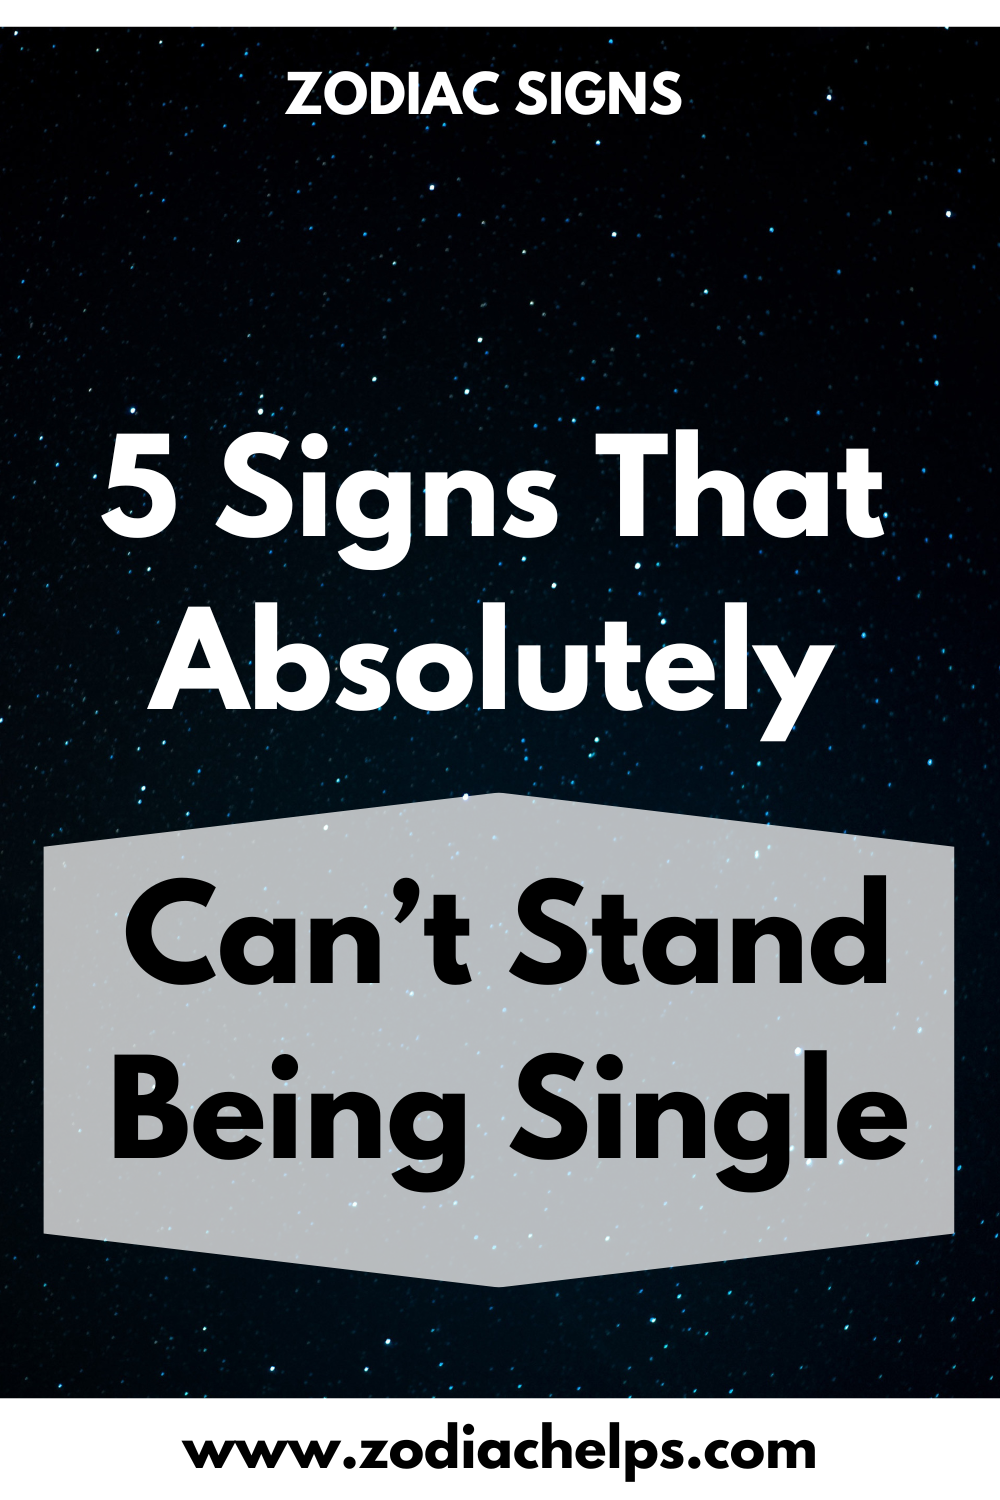 5 Signs That Absolutely Can’t Stand Being Single